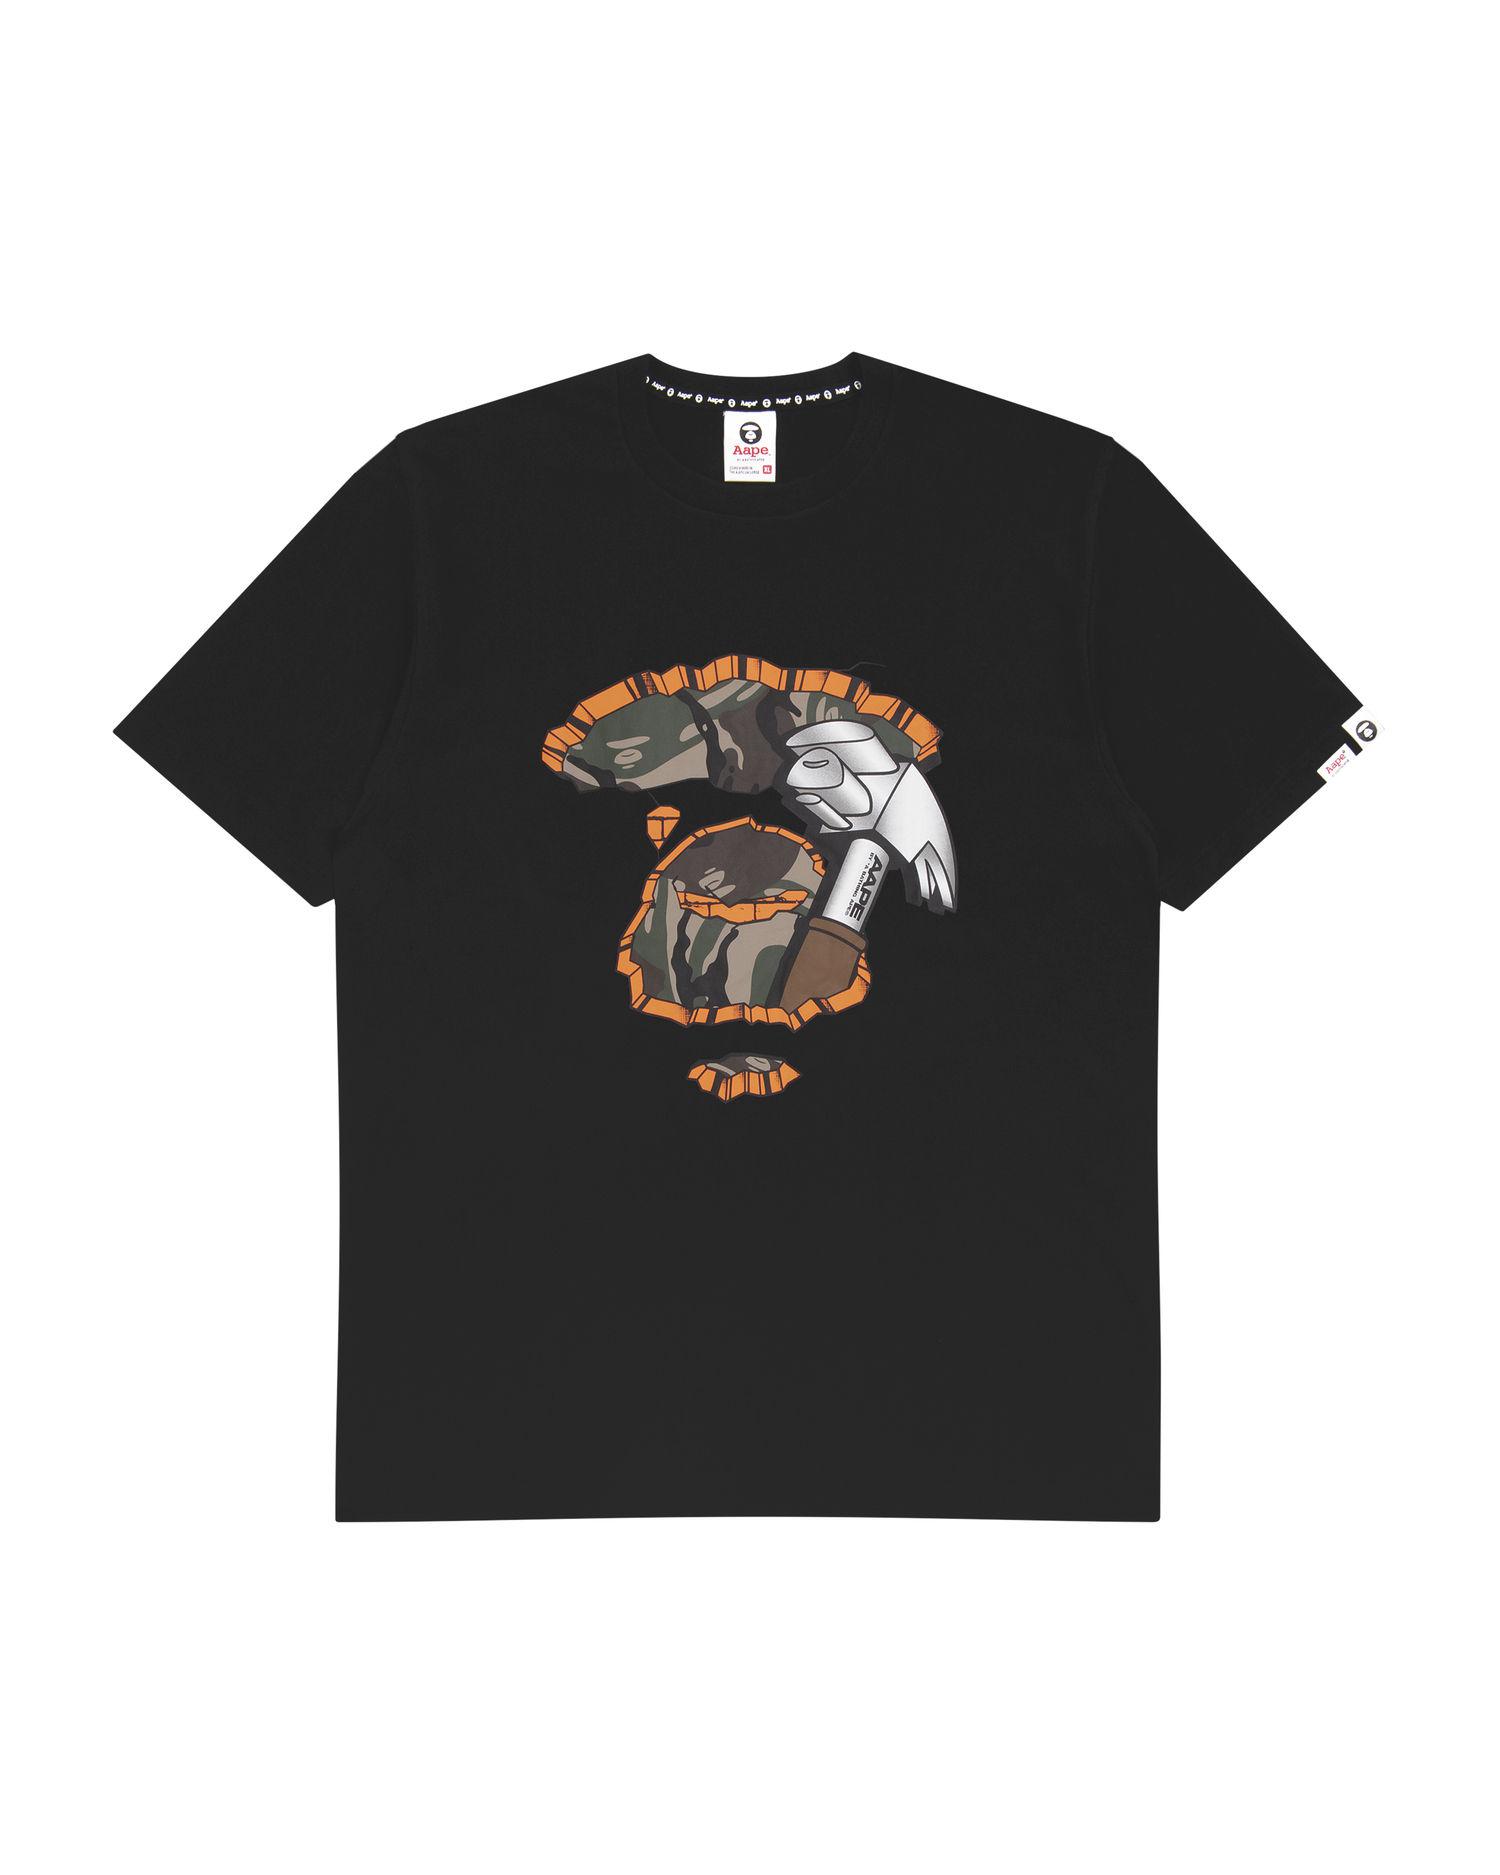 Moonface hammer graphic tee by AAPE